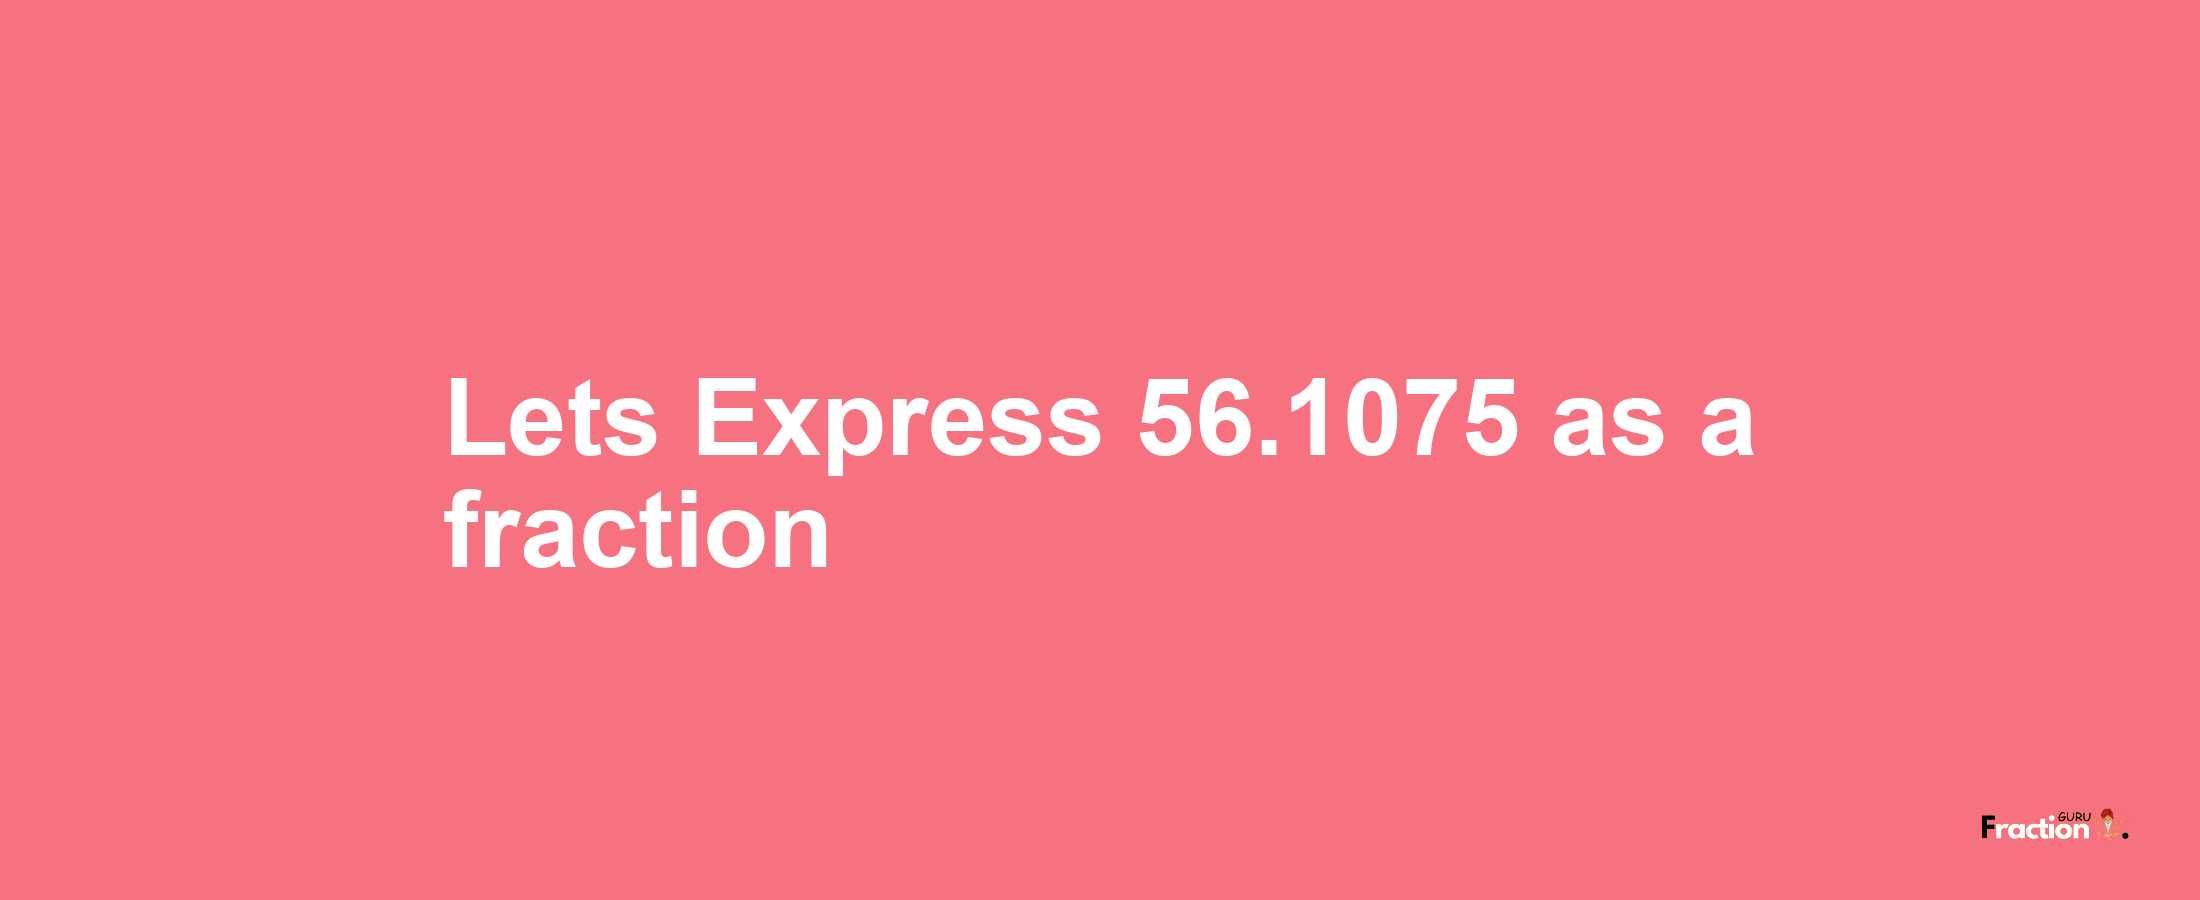 Lets Express 56.1075 as afraction